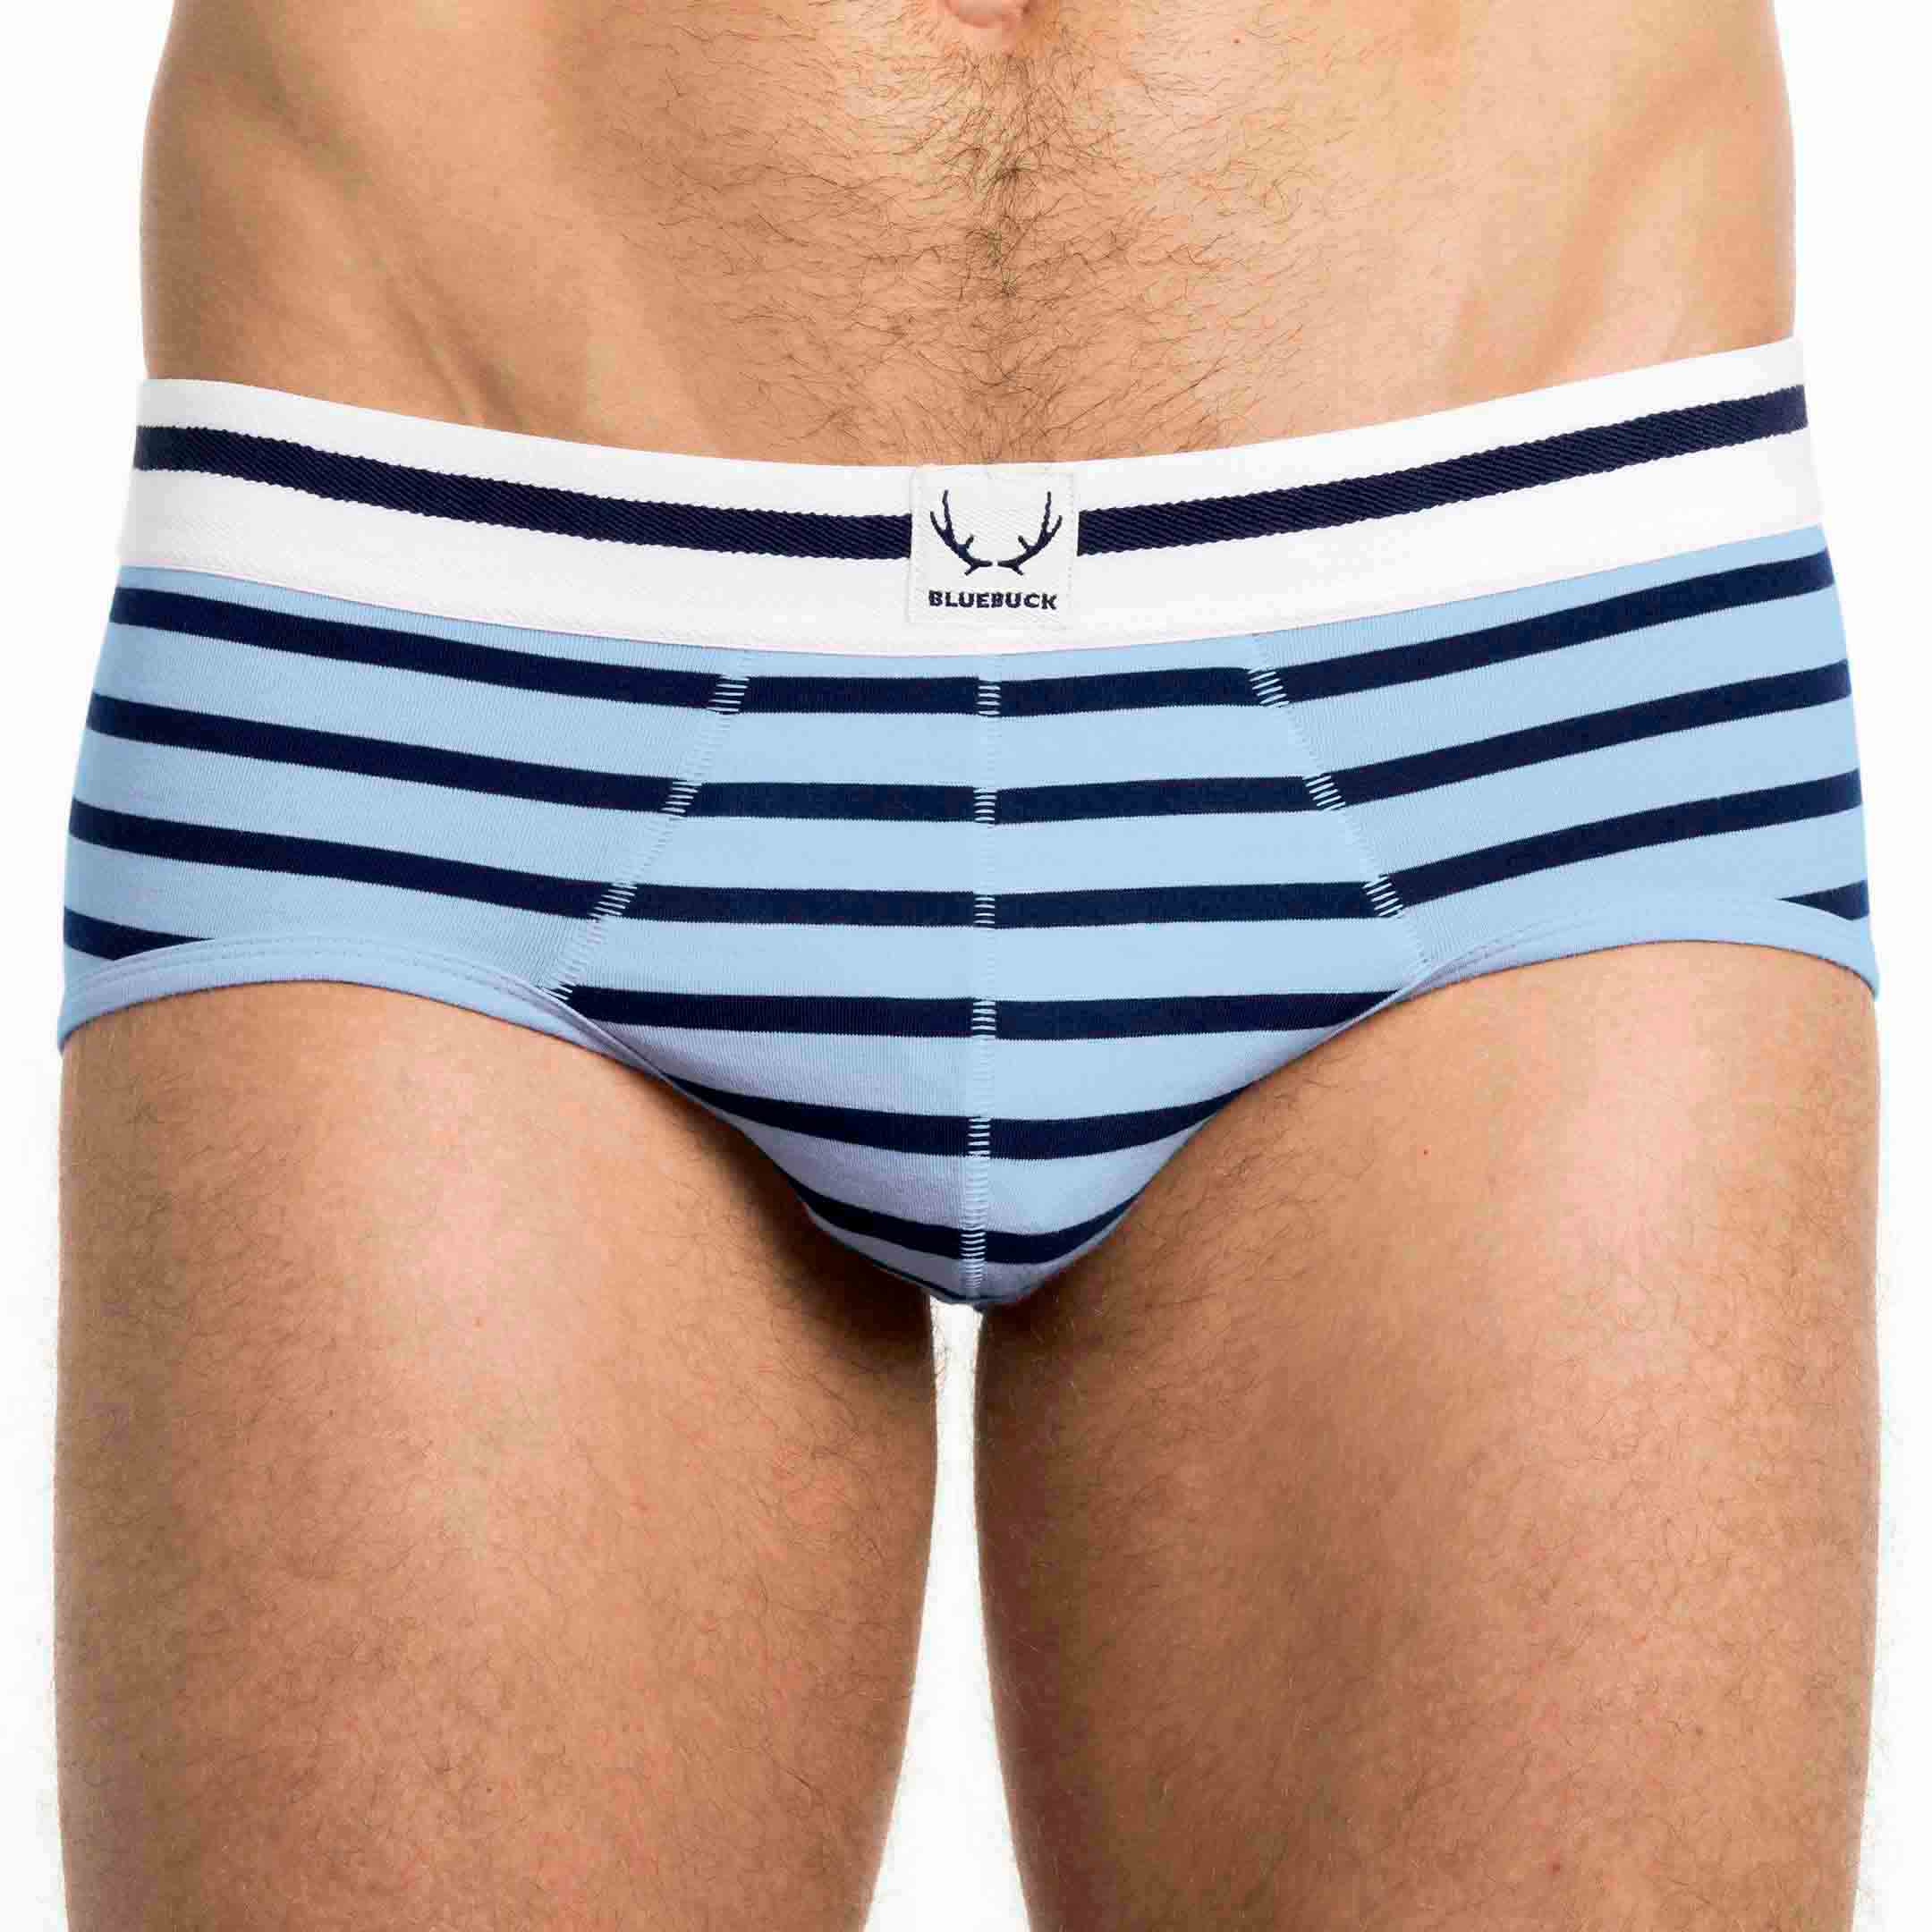 Arctic blue underpants made of organic cotton from Bluebuck